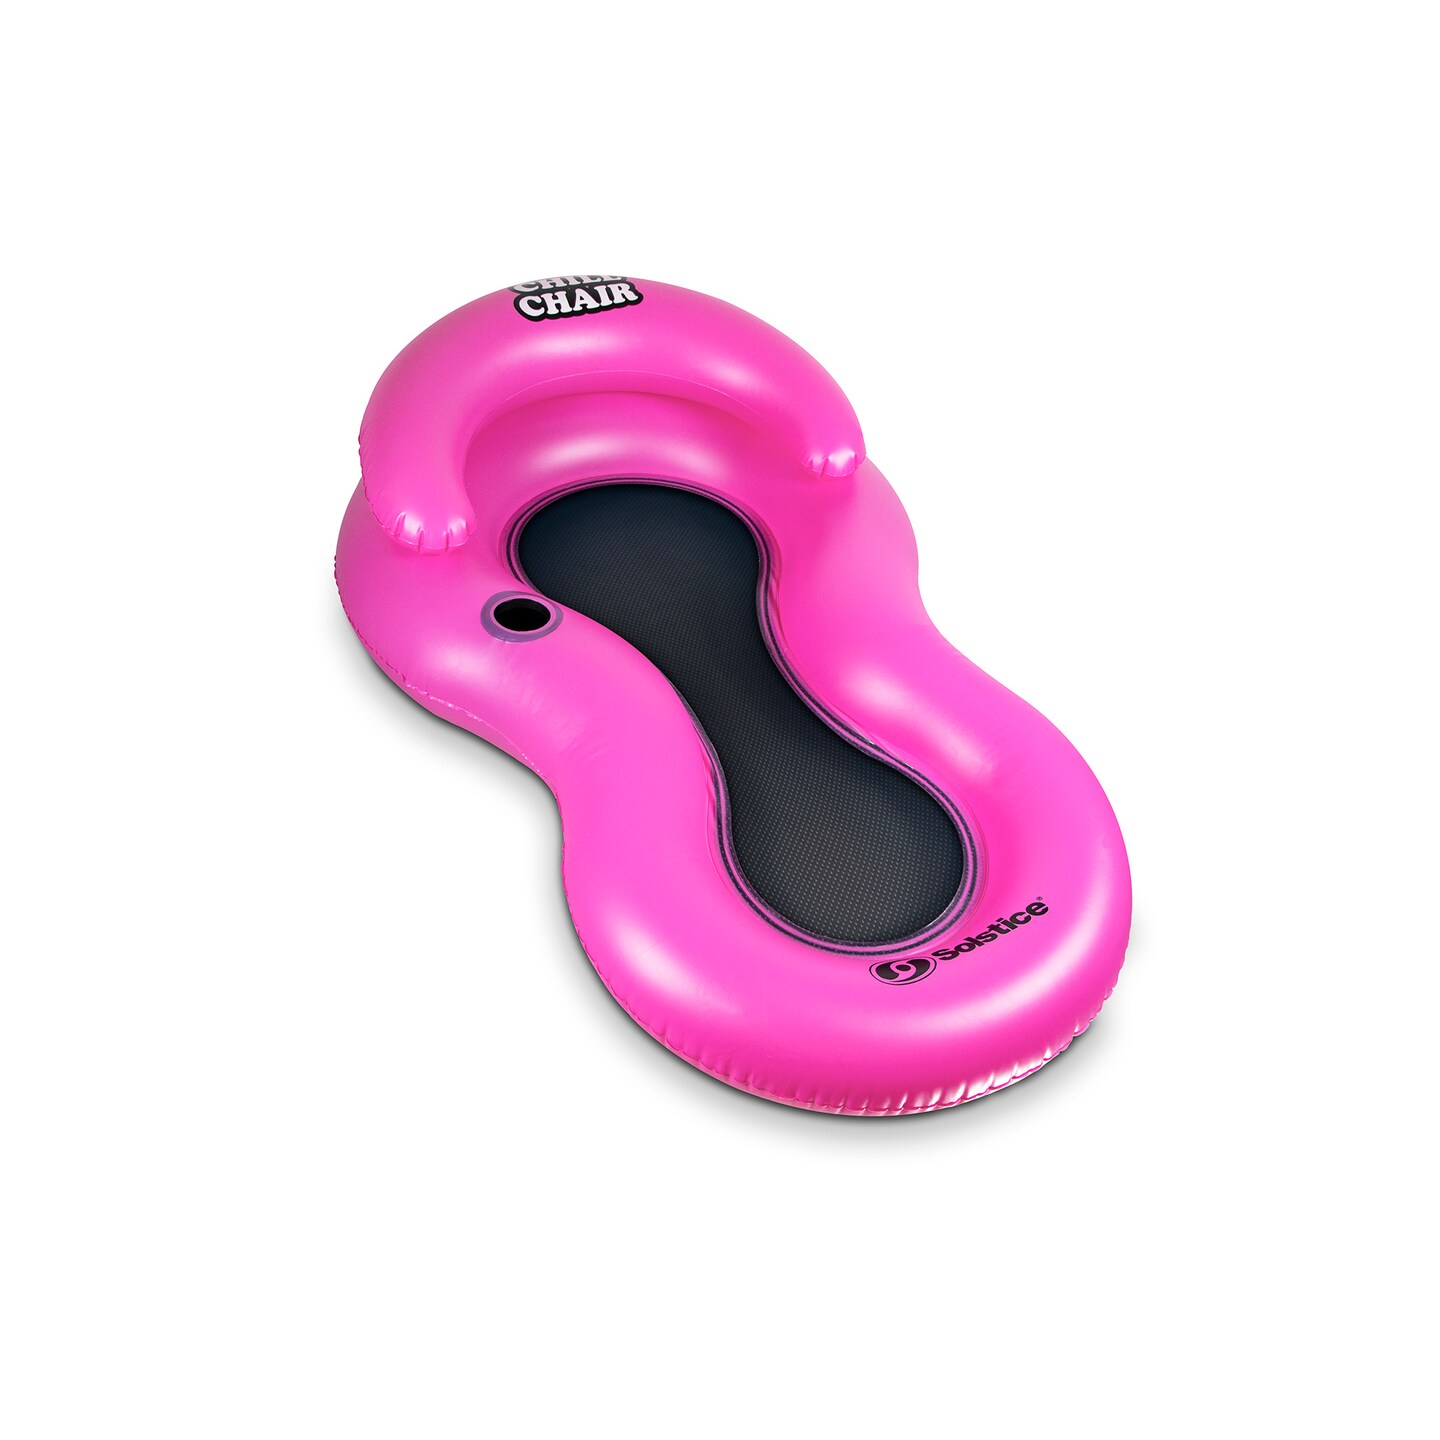 Swim Central 61-Inch Inflatable Hot Pink Chill Swimming Pool Floating Lounge Chair